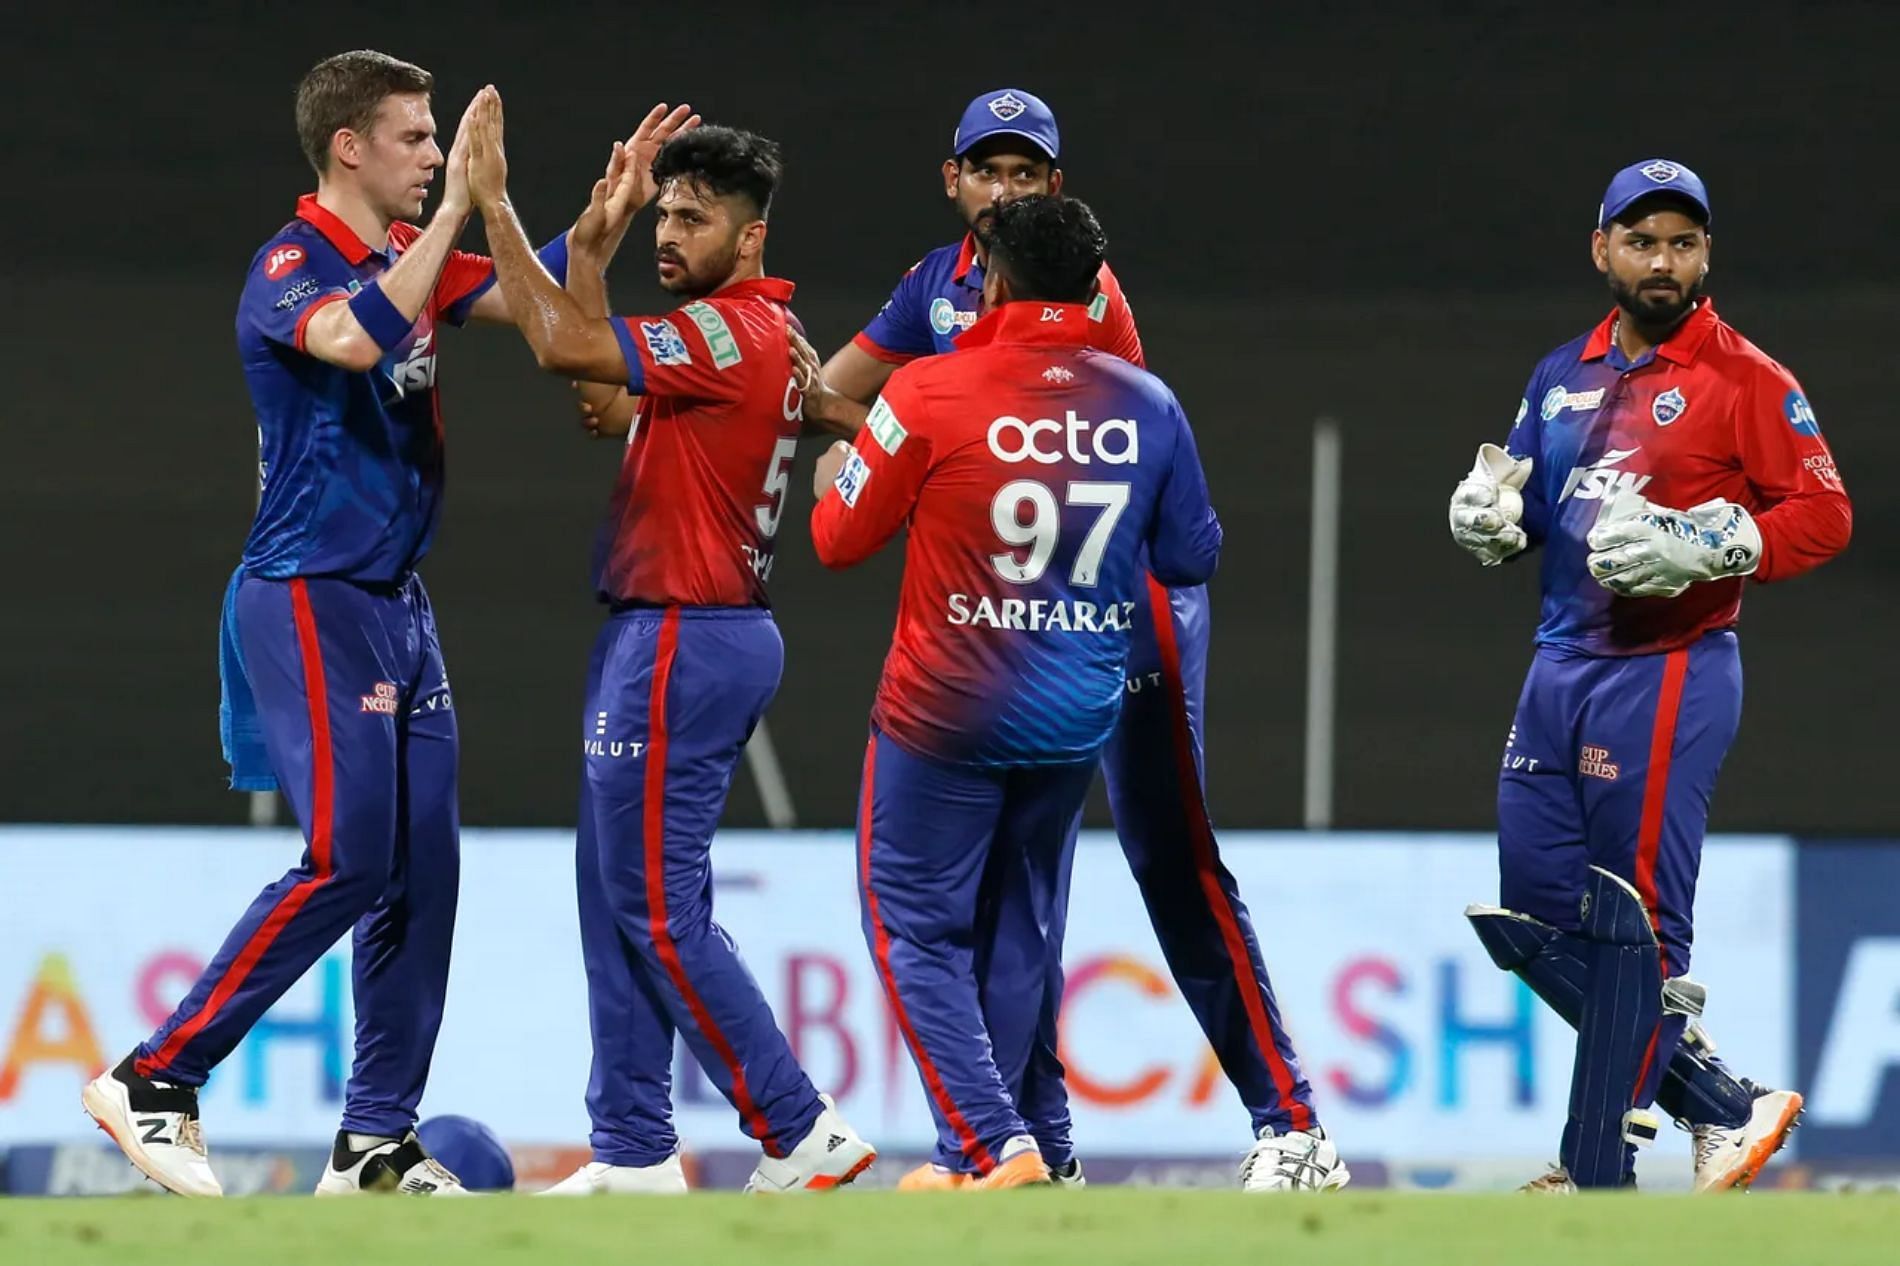 DC pacer Shardul Thakur celebrates a wicket with teammates. Pic: IPLT20.COM